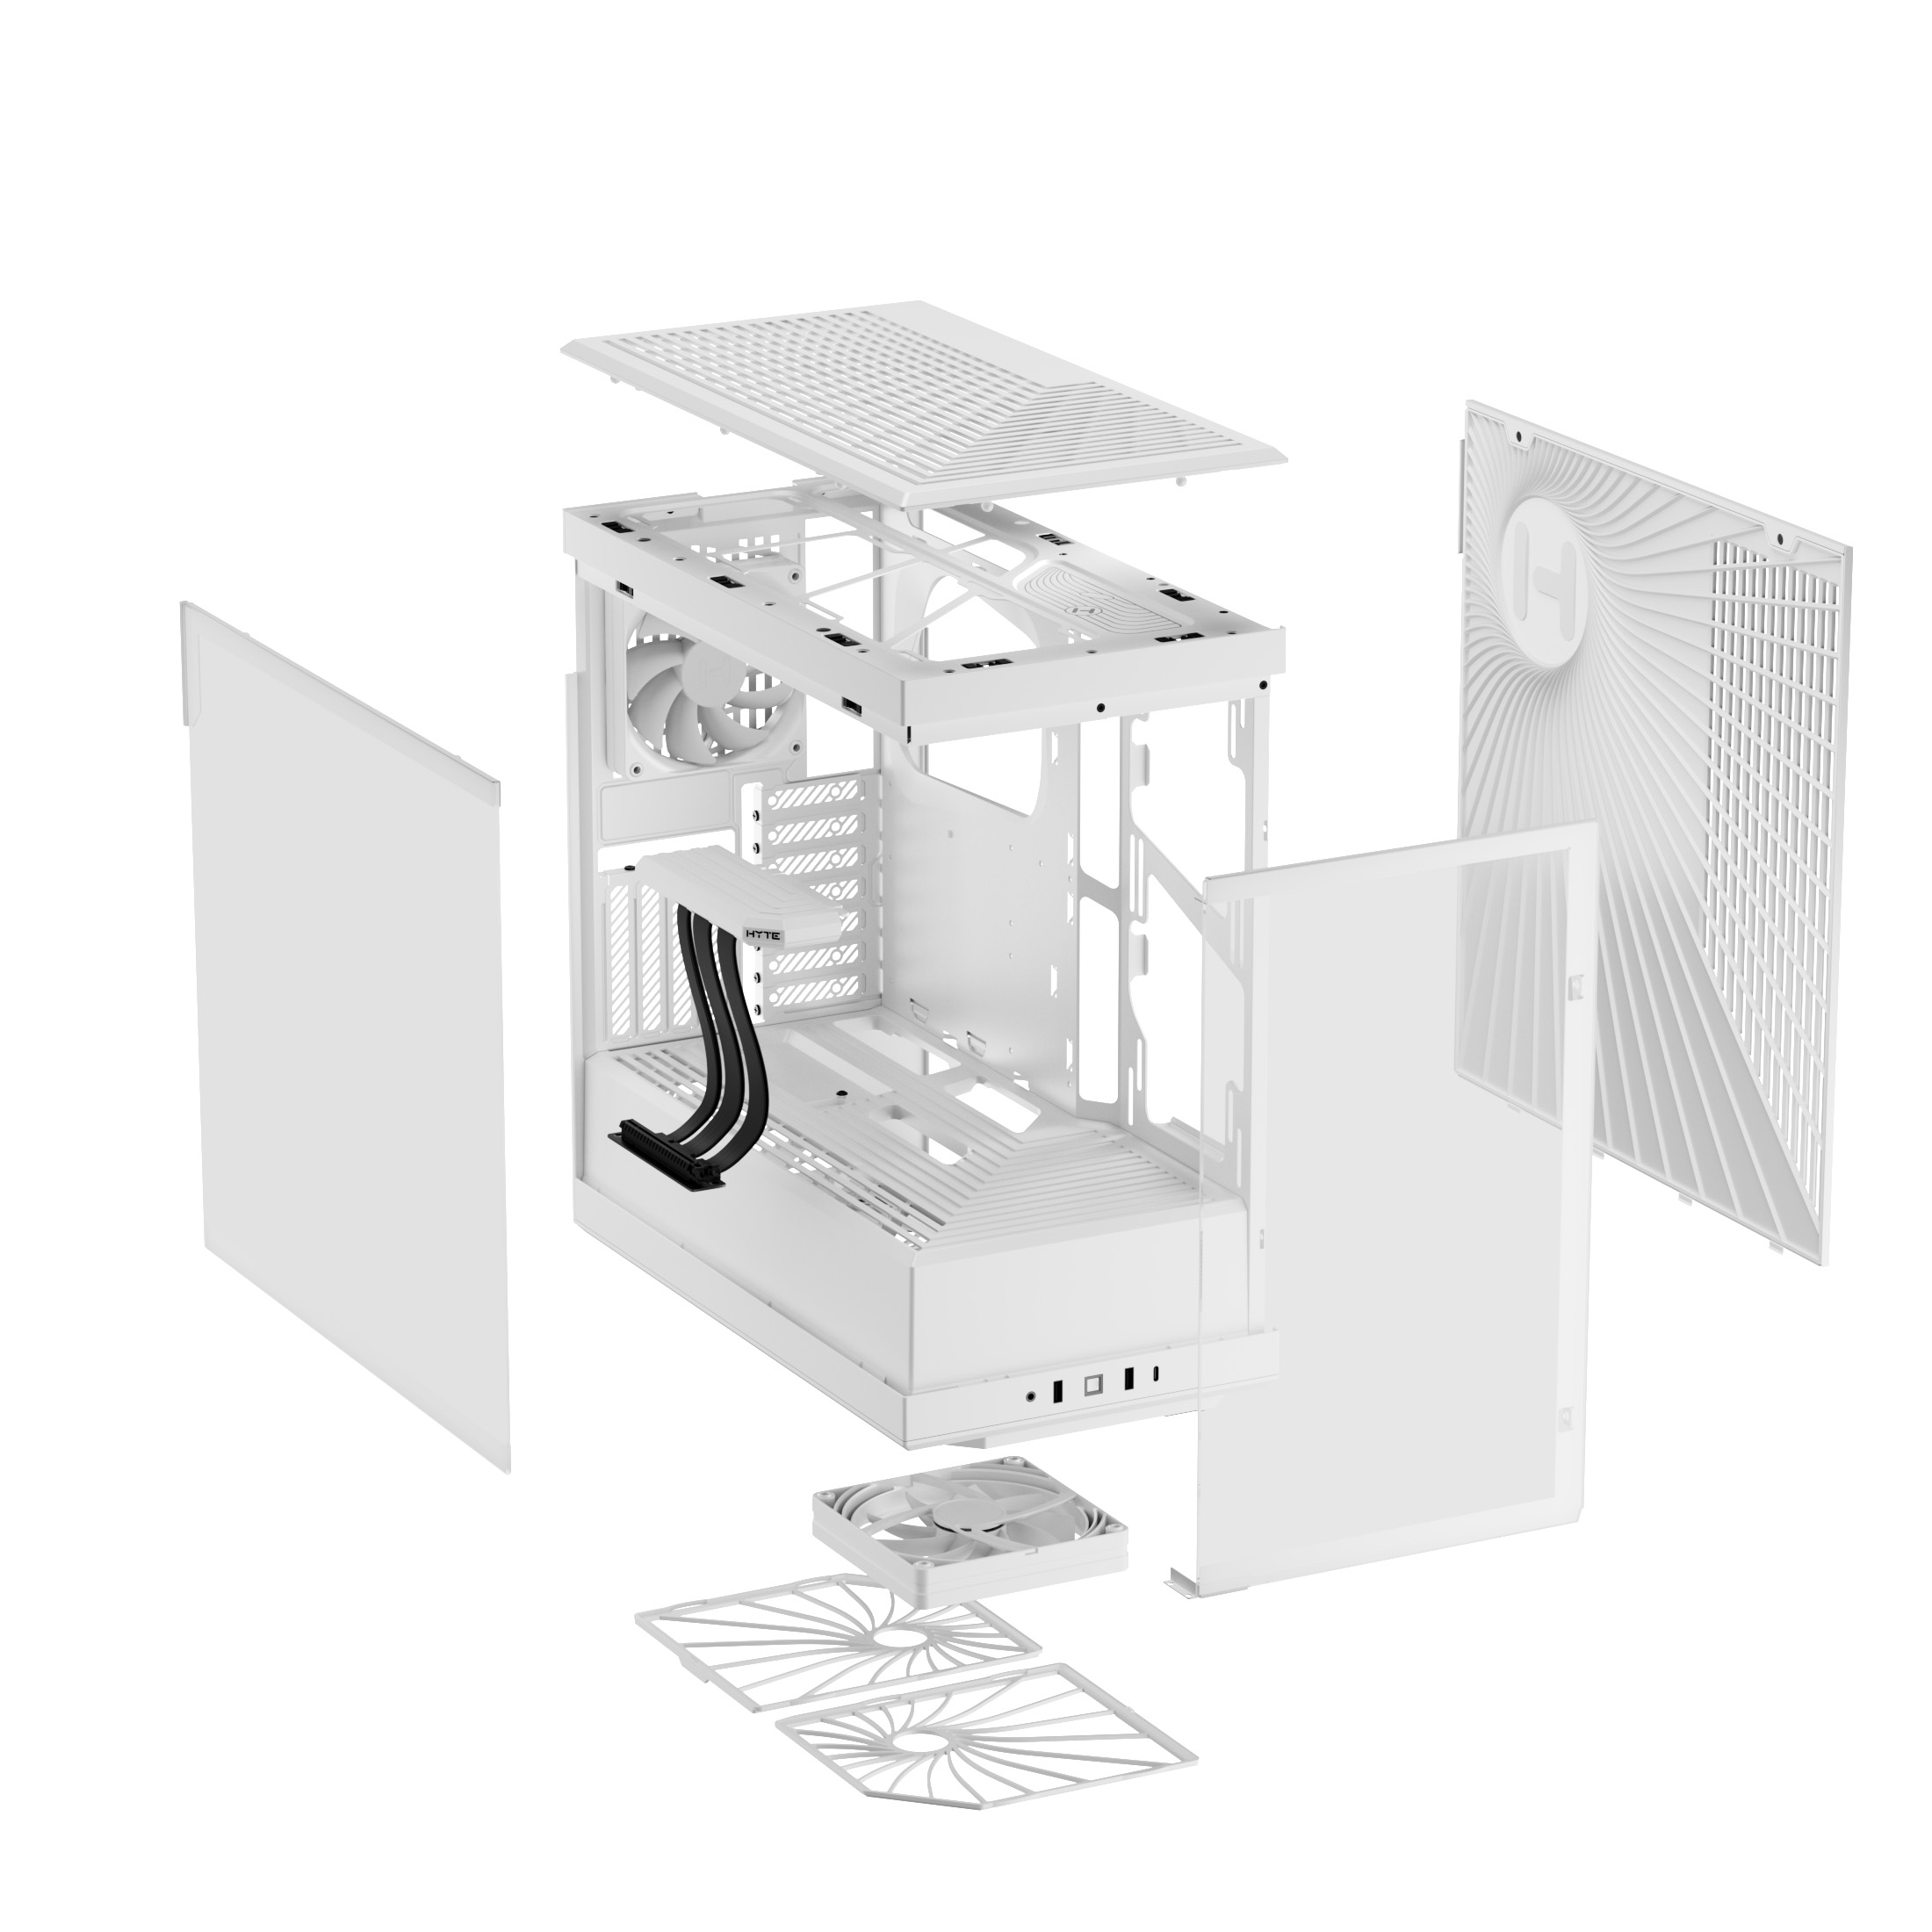 HYTE - HYTE Y40 Mid-Tower ATX Case - Snow White